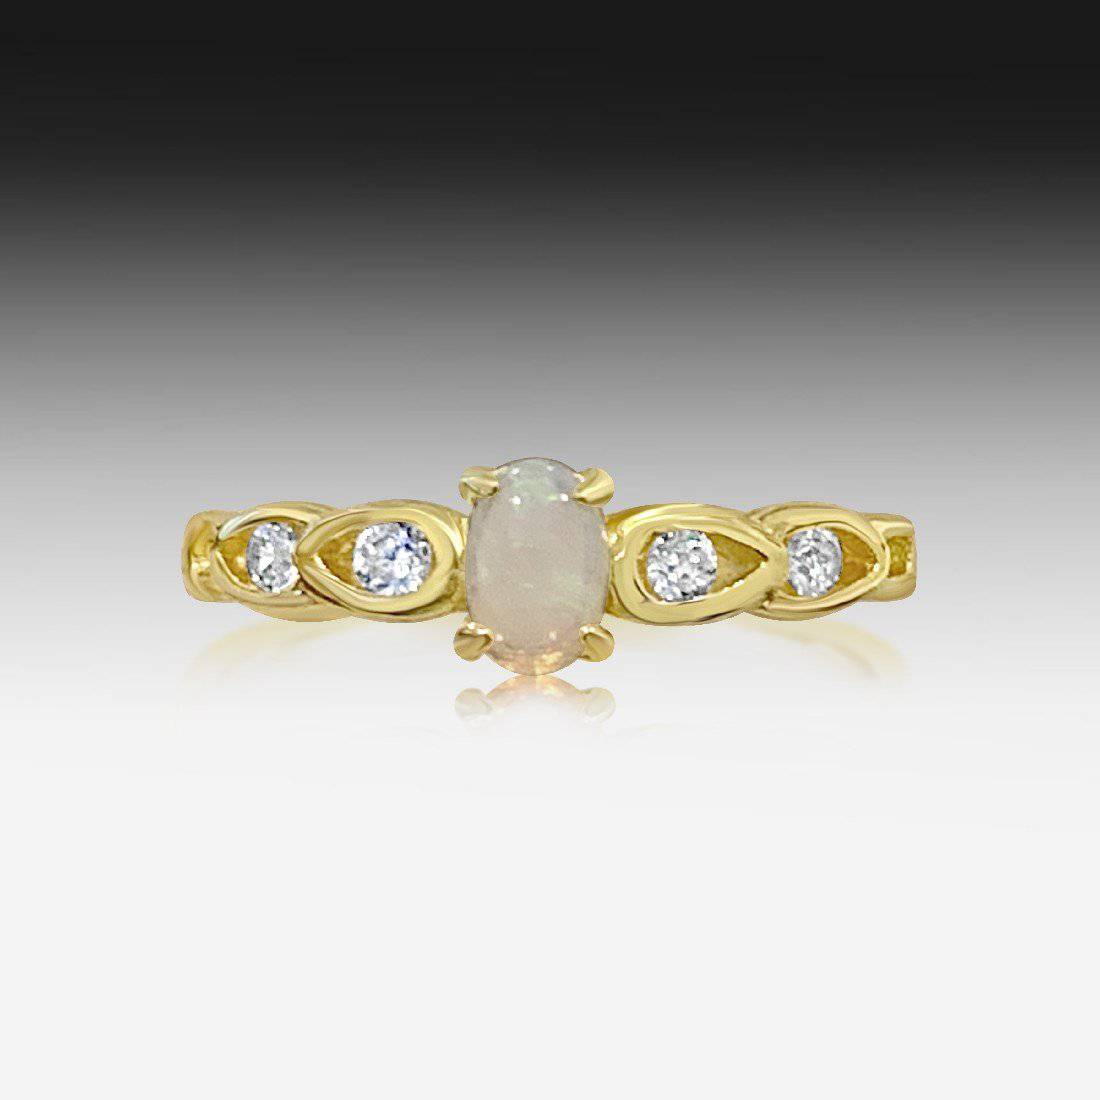 Sterling Silver Gold plated Opal and cubic zirconia ring - Masterpiece Jewellery Opal & Gems Sydney Australia | Online Shop